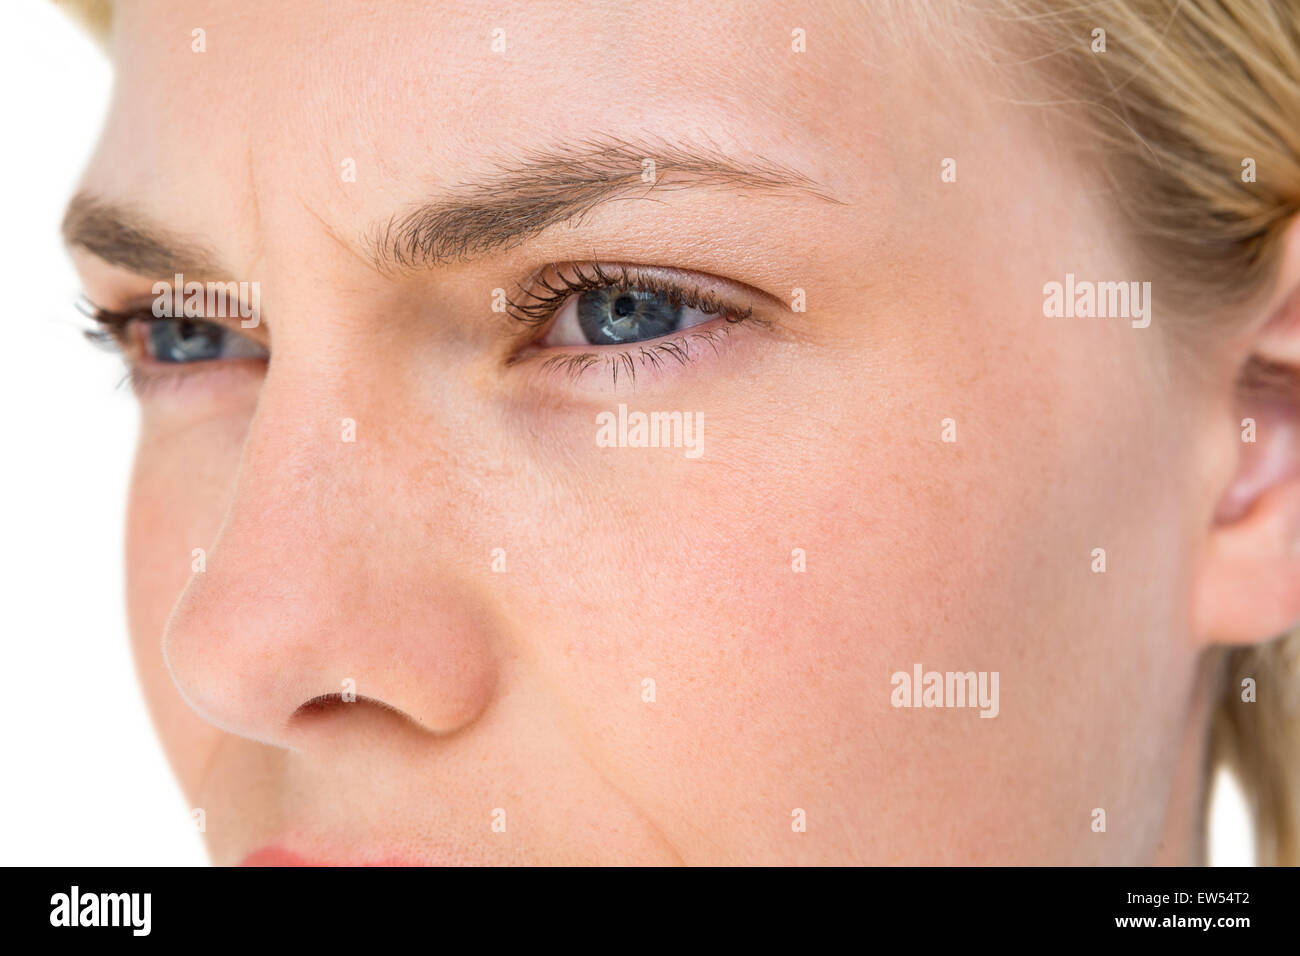 Serious blond woman looking away Stock Photo